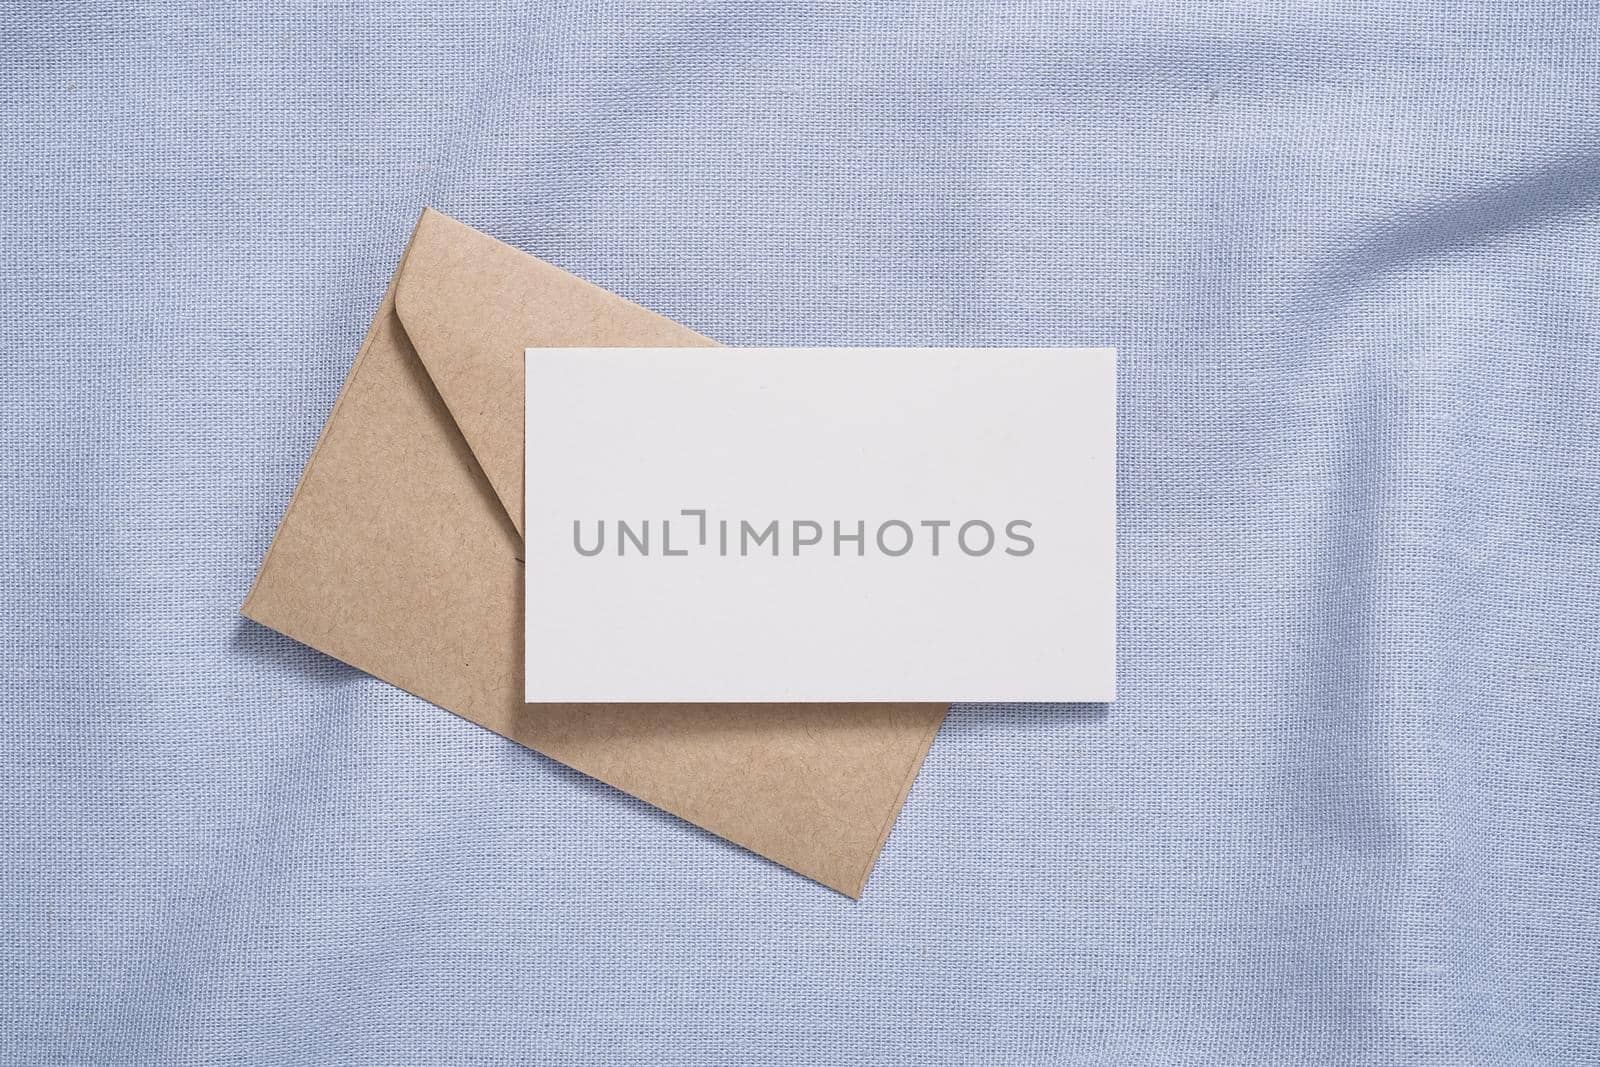 White blank paper card and envelope mockup on blue neutral colored textile